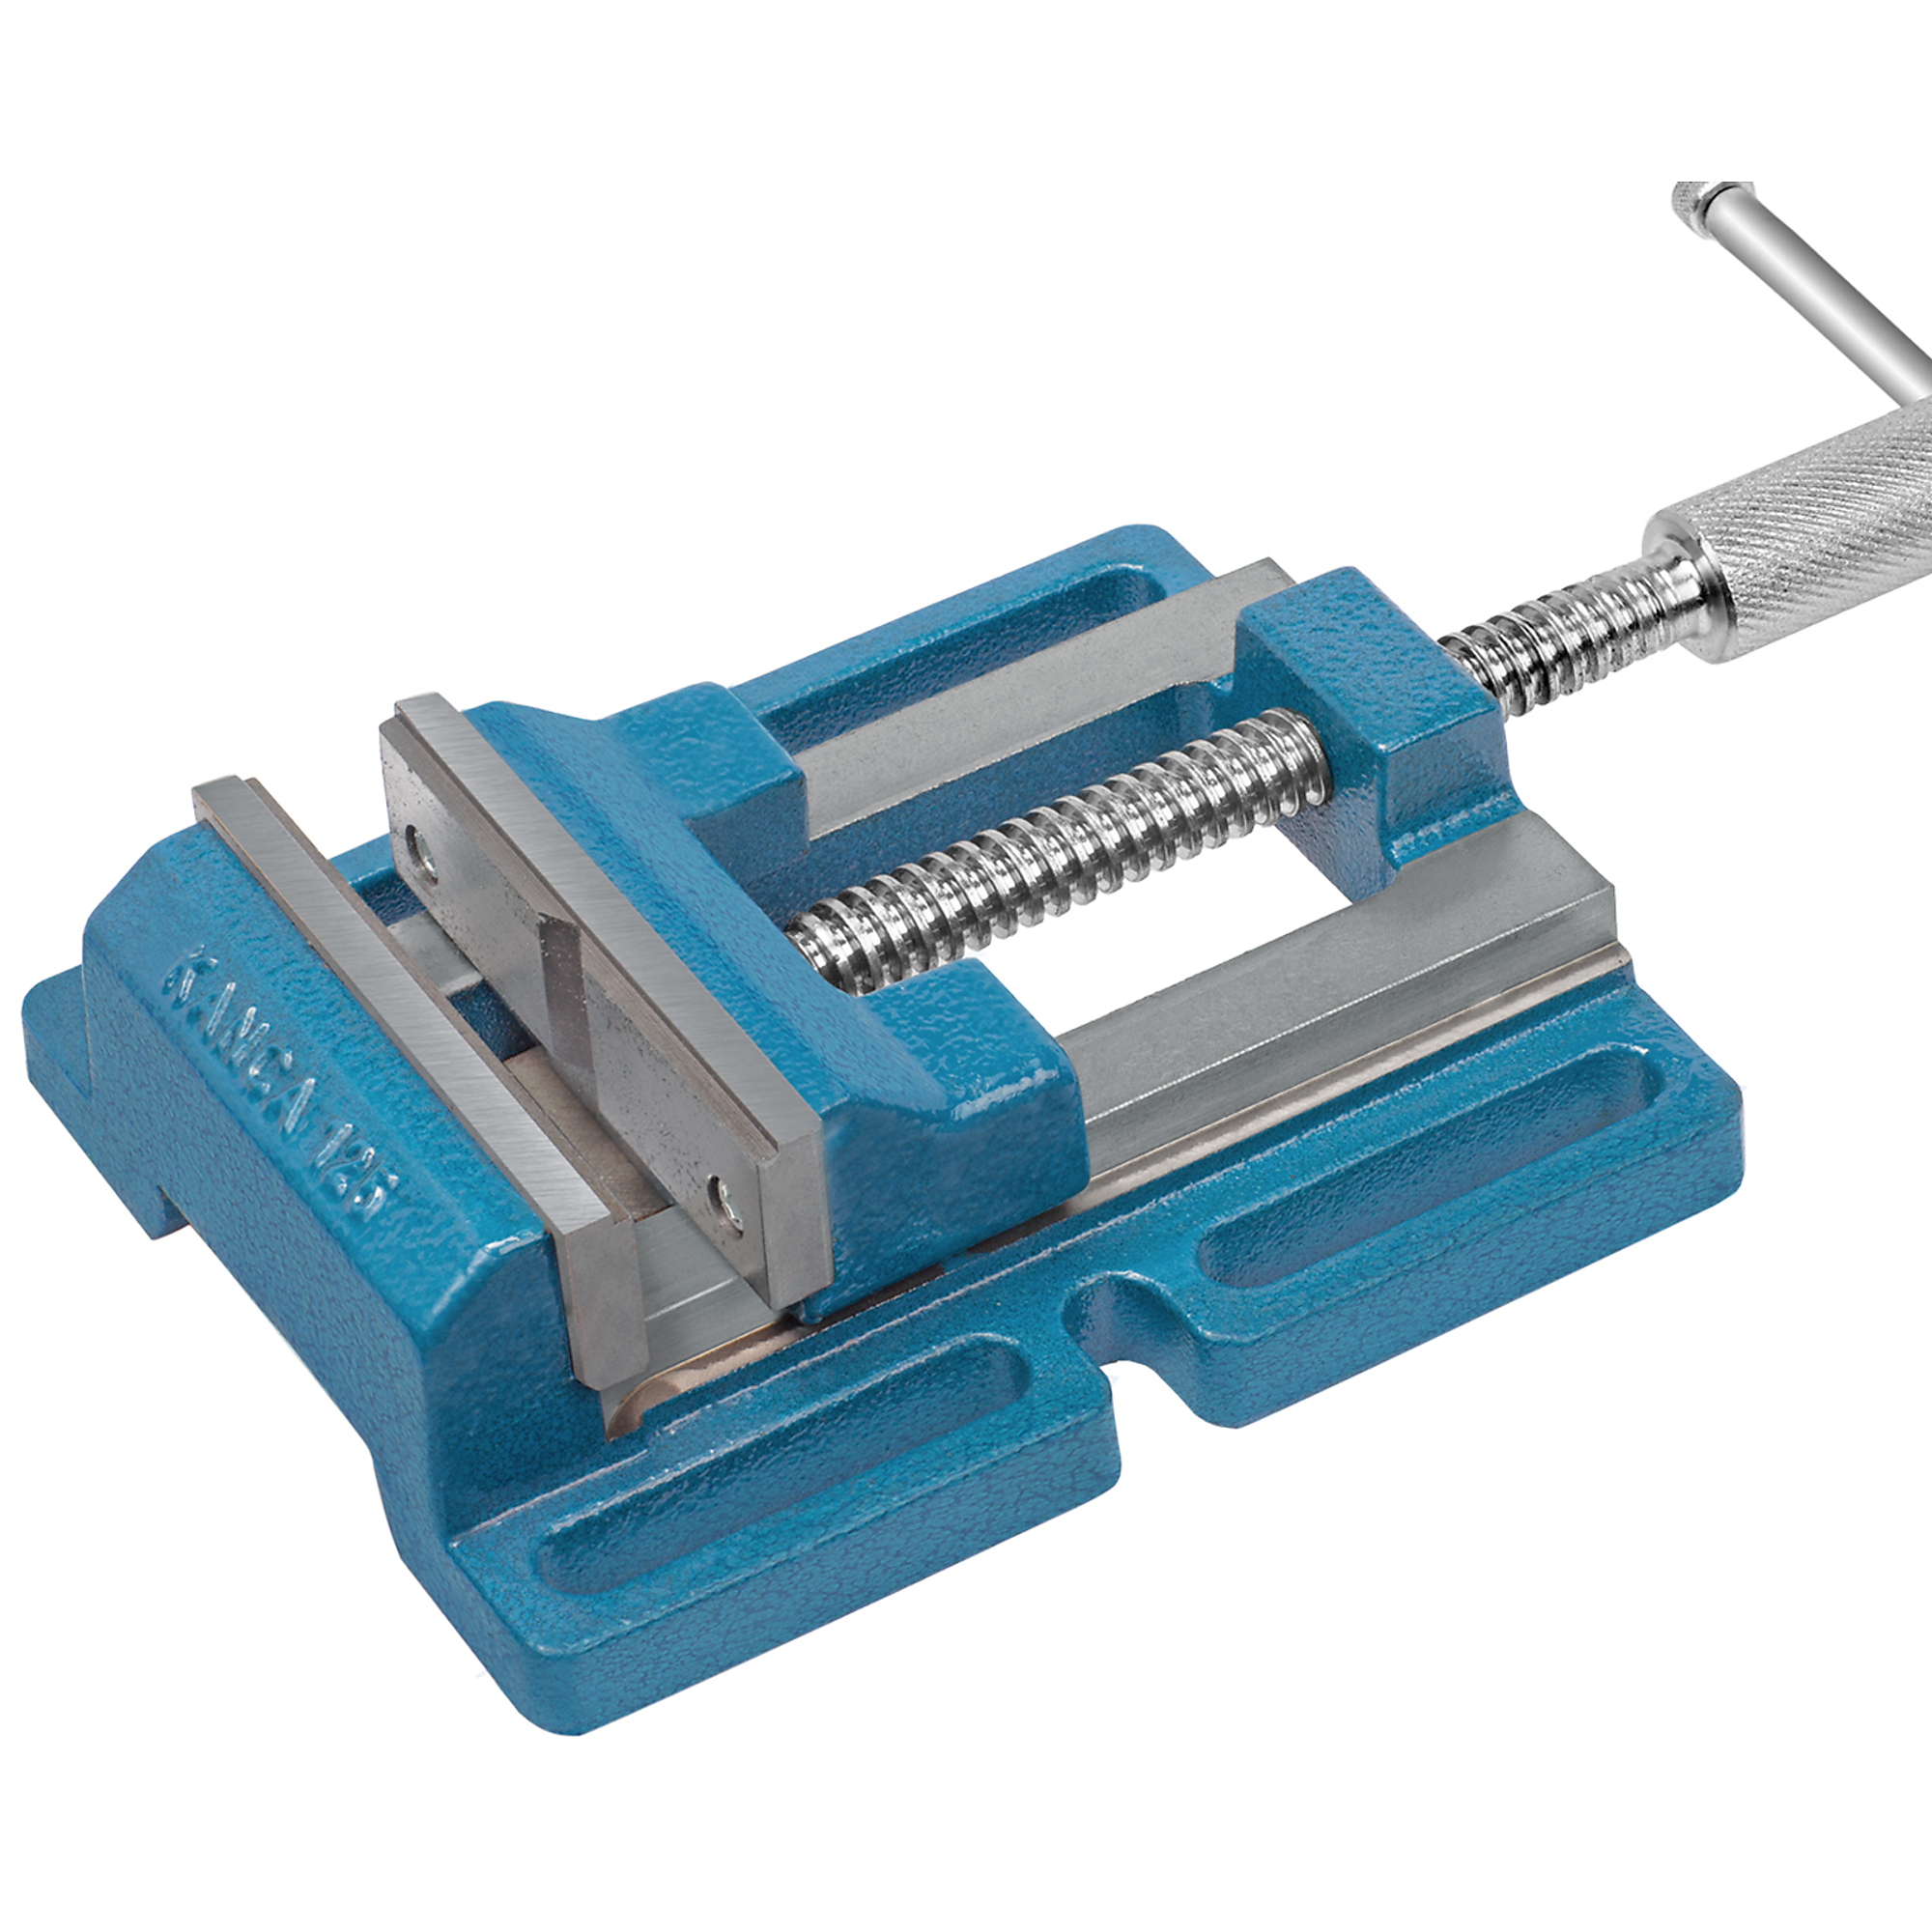 KANCA, DRILL PRESS VISE 150 MM - 6Inch, Jaw Width 6 in, Jaw Capacity 7.5 in, Model Drill Press Vise